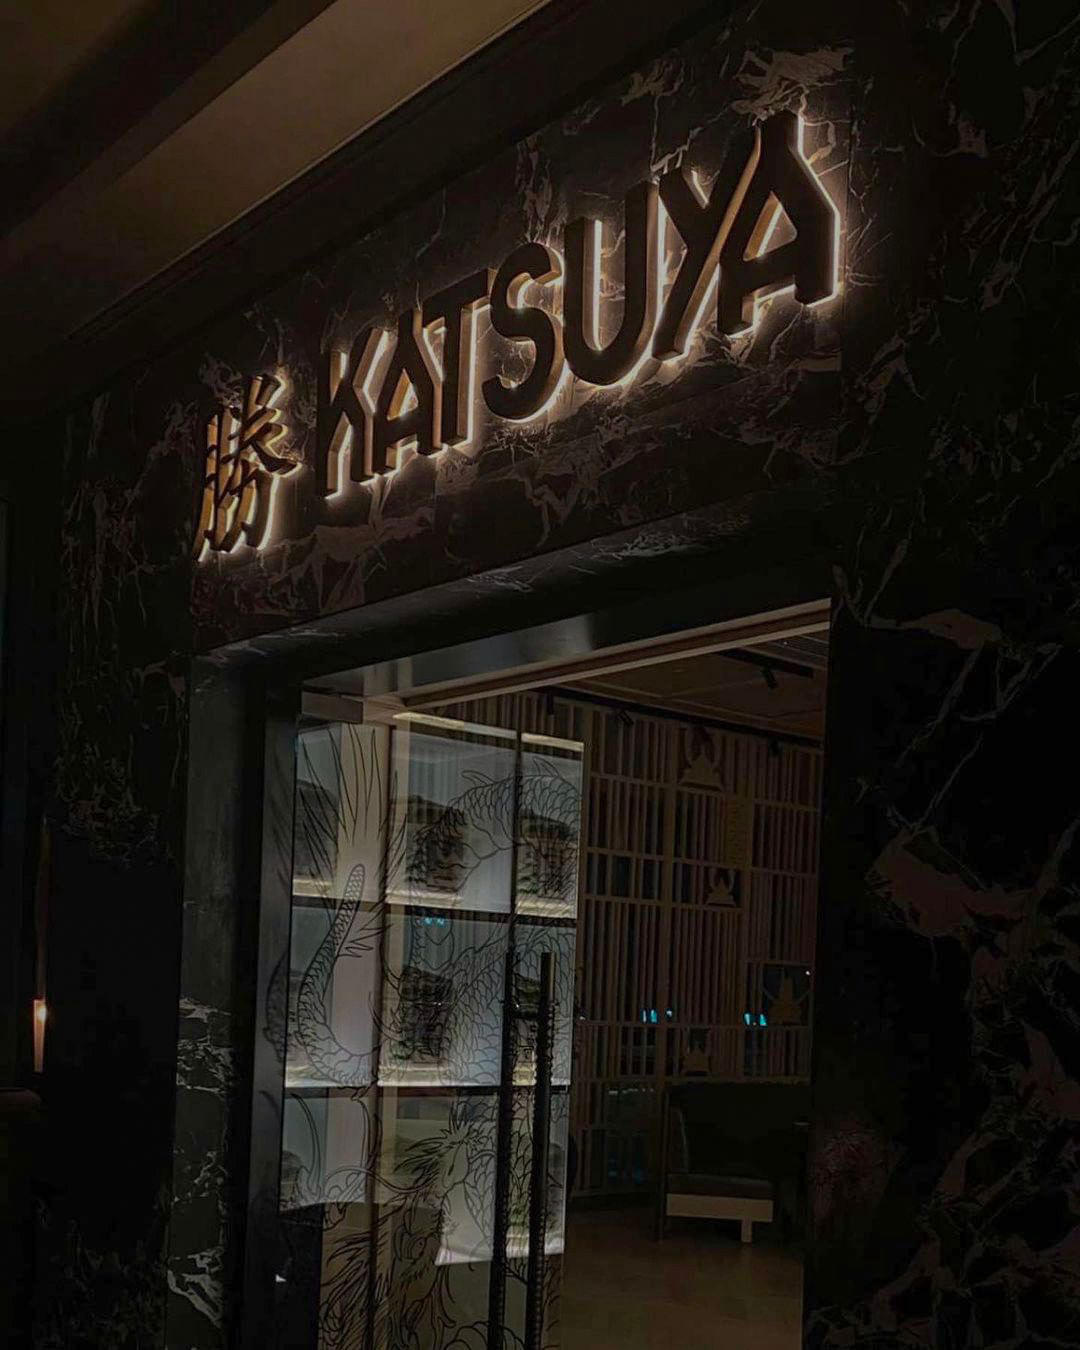 Hyde Hotel Dubai - Always a warm welcome at Katsuya, are you joining us for Social Hour